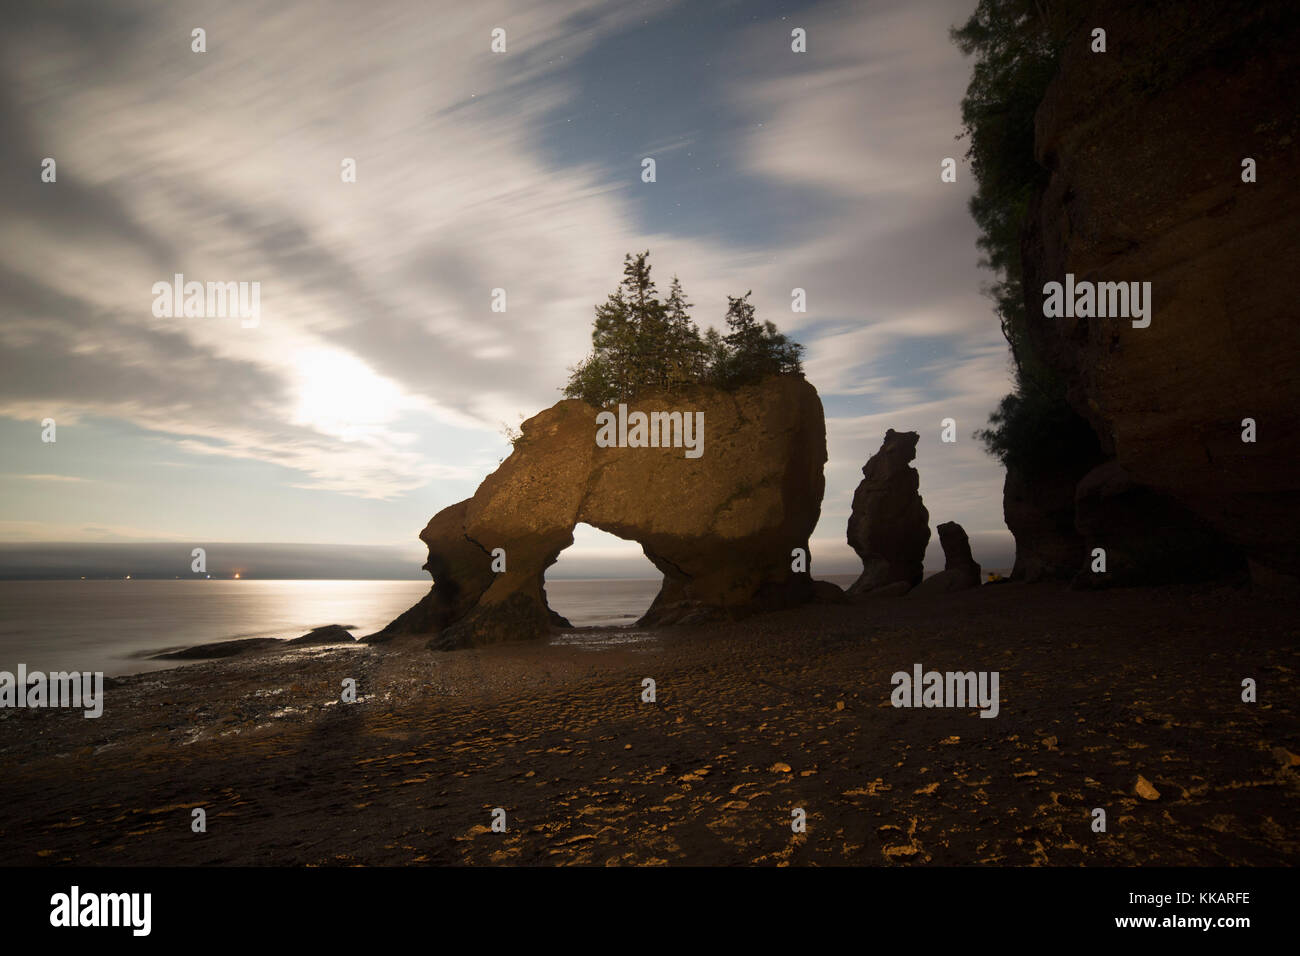 Hopewell Rocks, the flowerpot rocks, on the Bay of Fundy, scene of the world's highest tides, at night in New Brunswick, Canada, North America Stock Photo